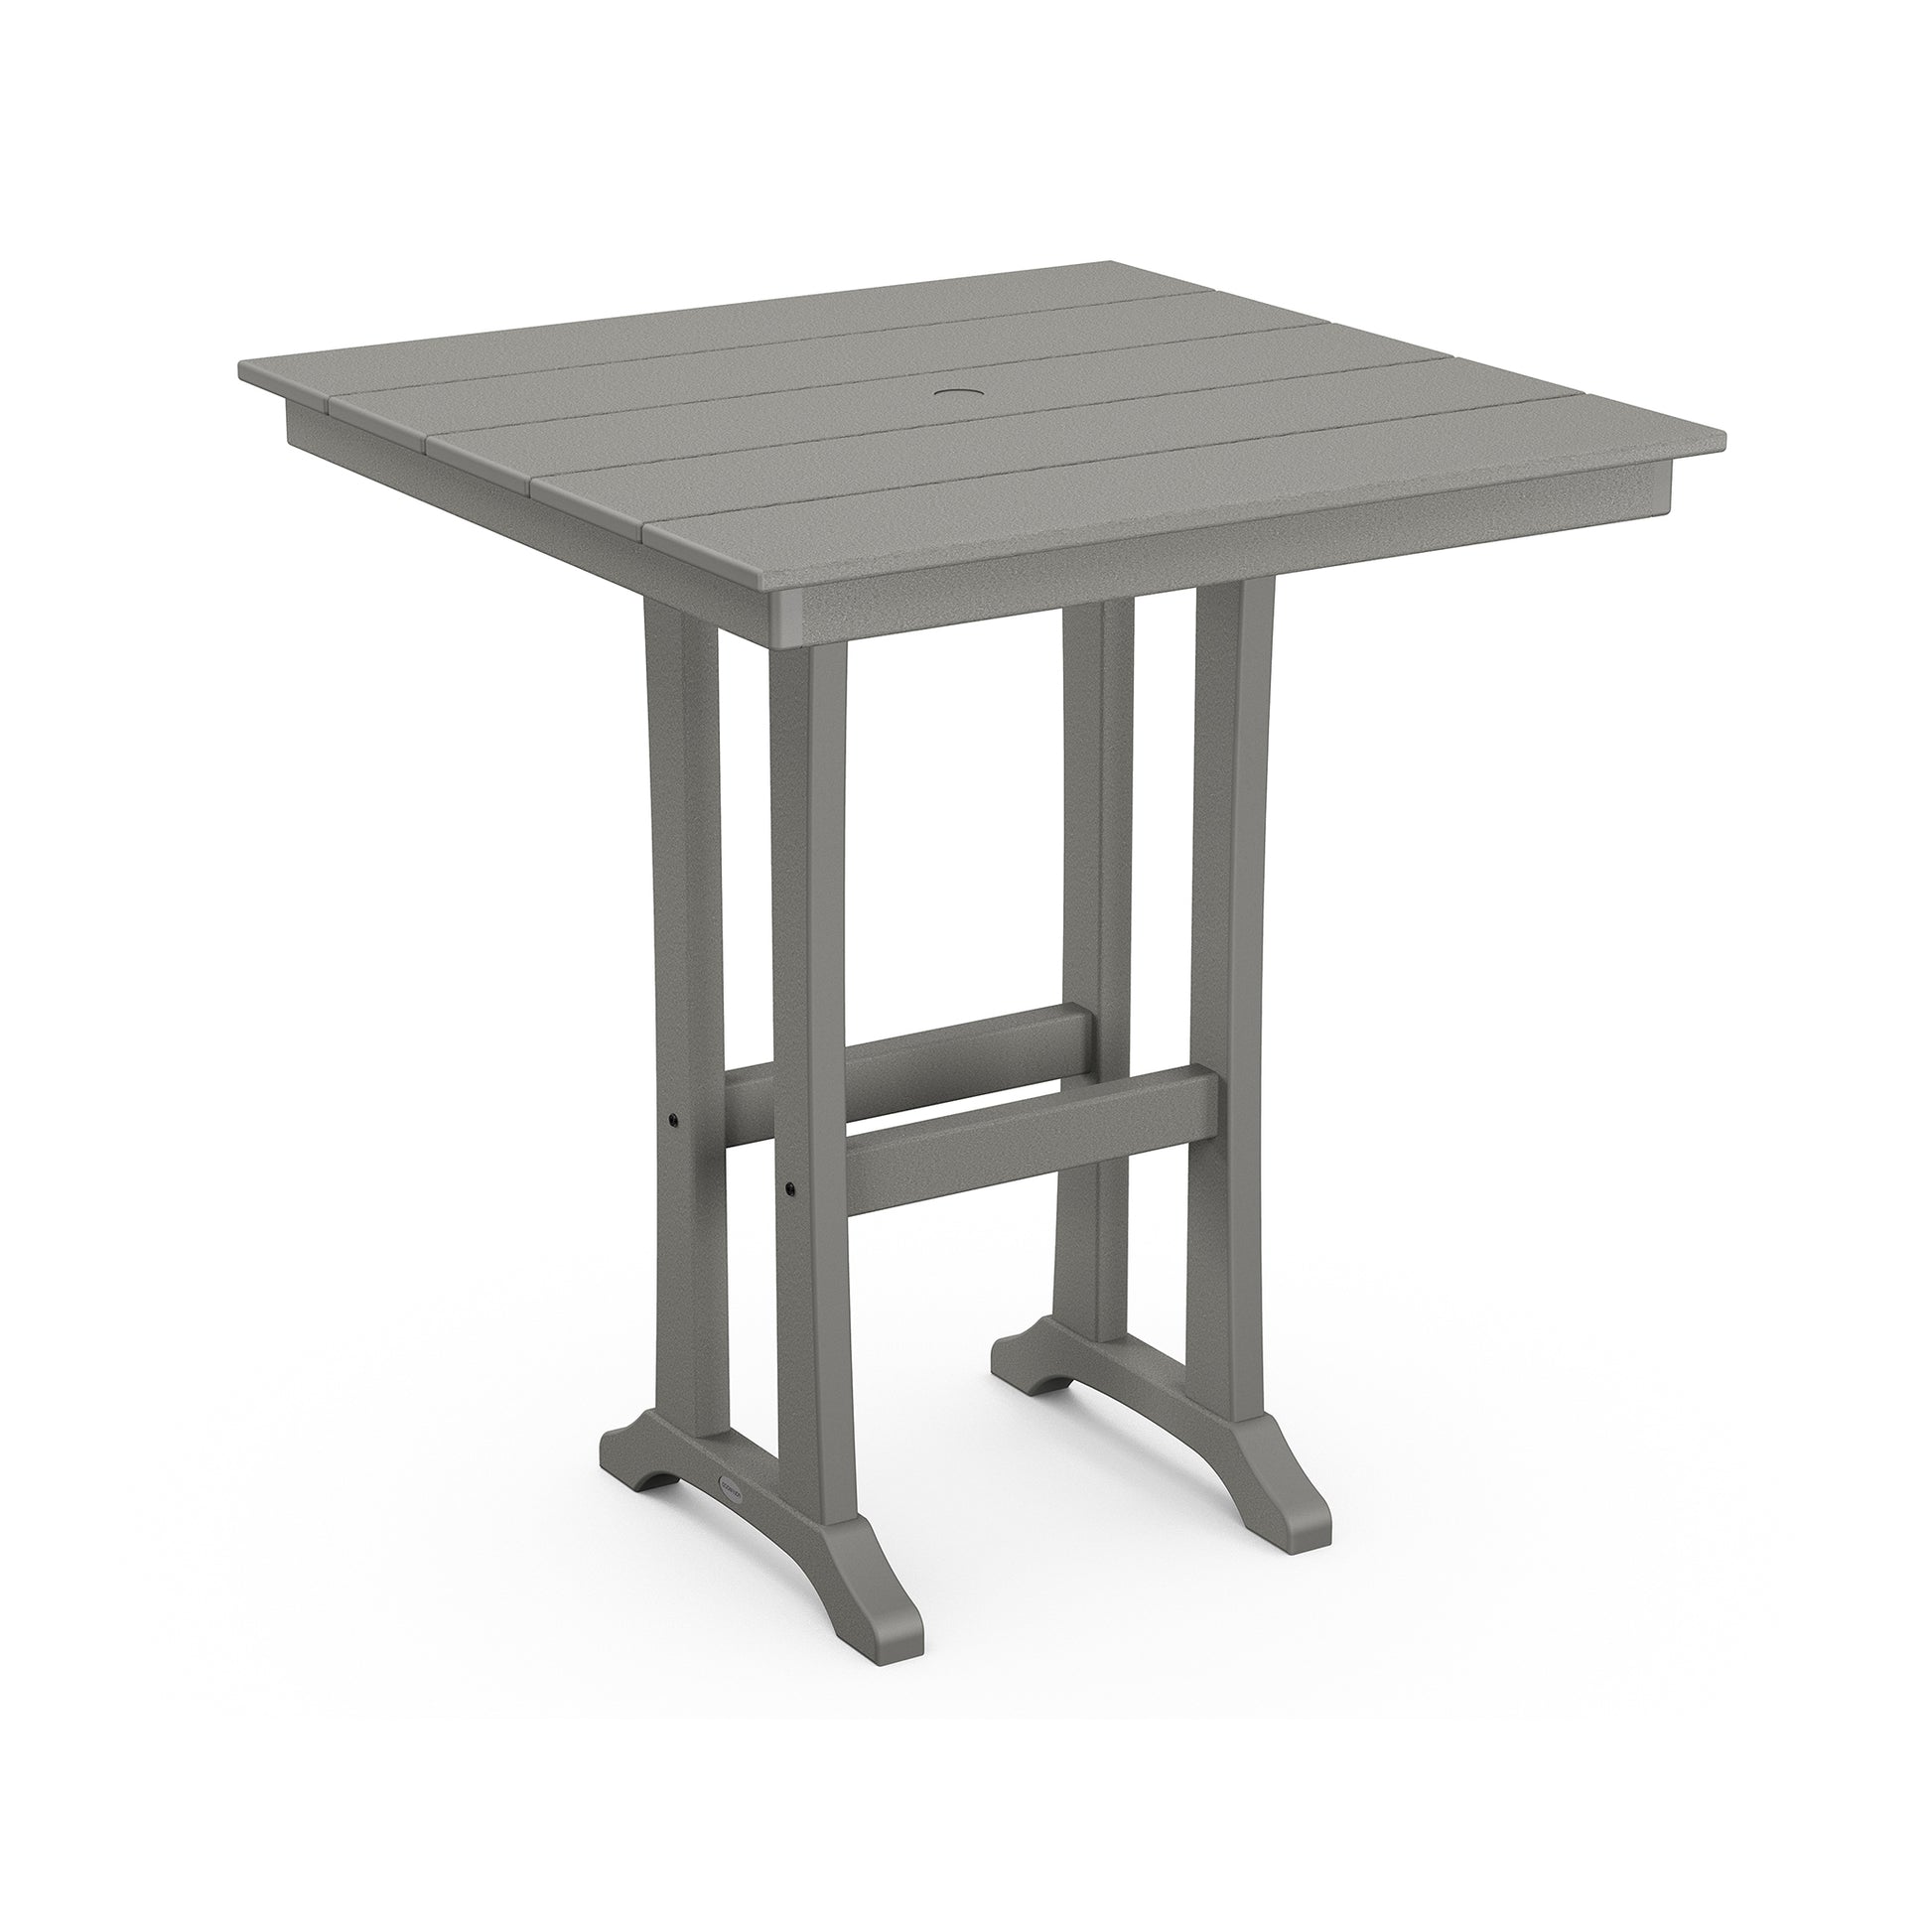 A 3D-rendered image of a simple, modern, gray square POLYWOOD Farmhouse Trestle 37" Bar Table with sturdy legs and a central umbrella hole, crafted from POLYWOOD lumber. The table